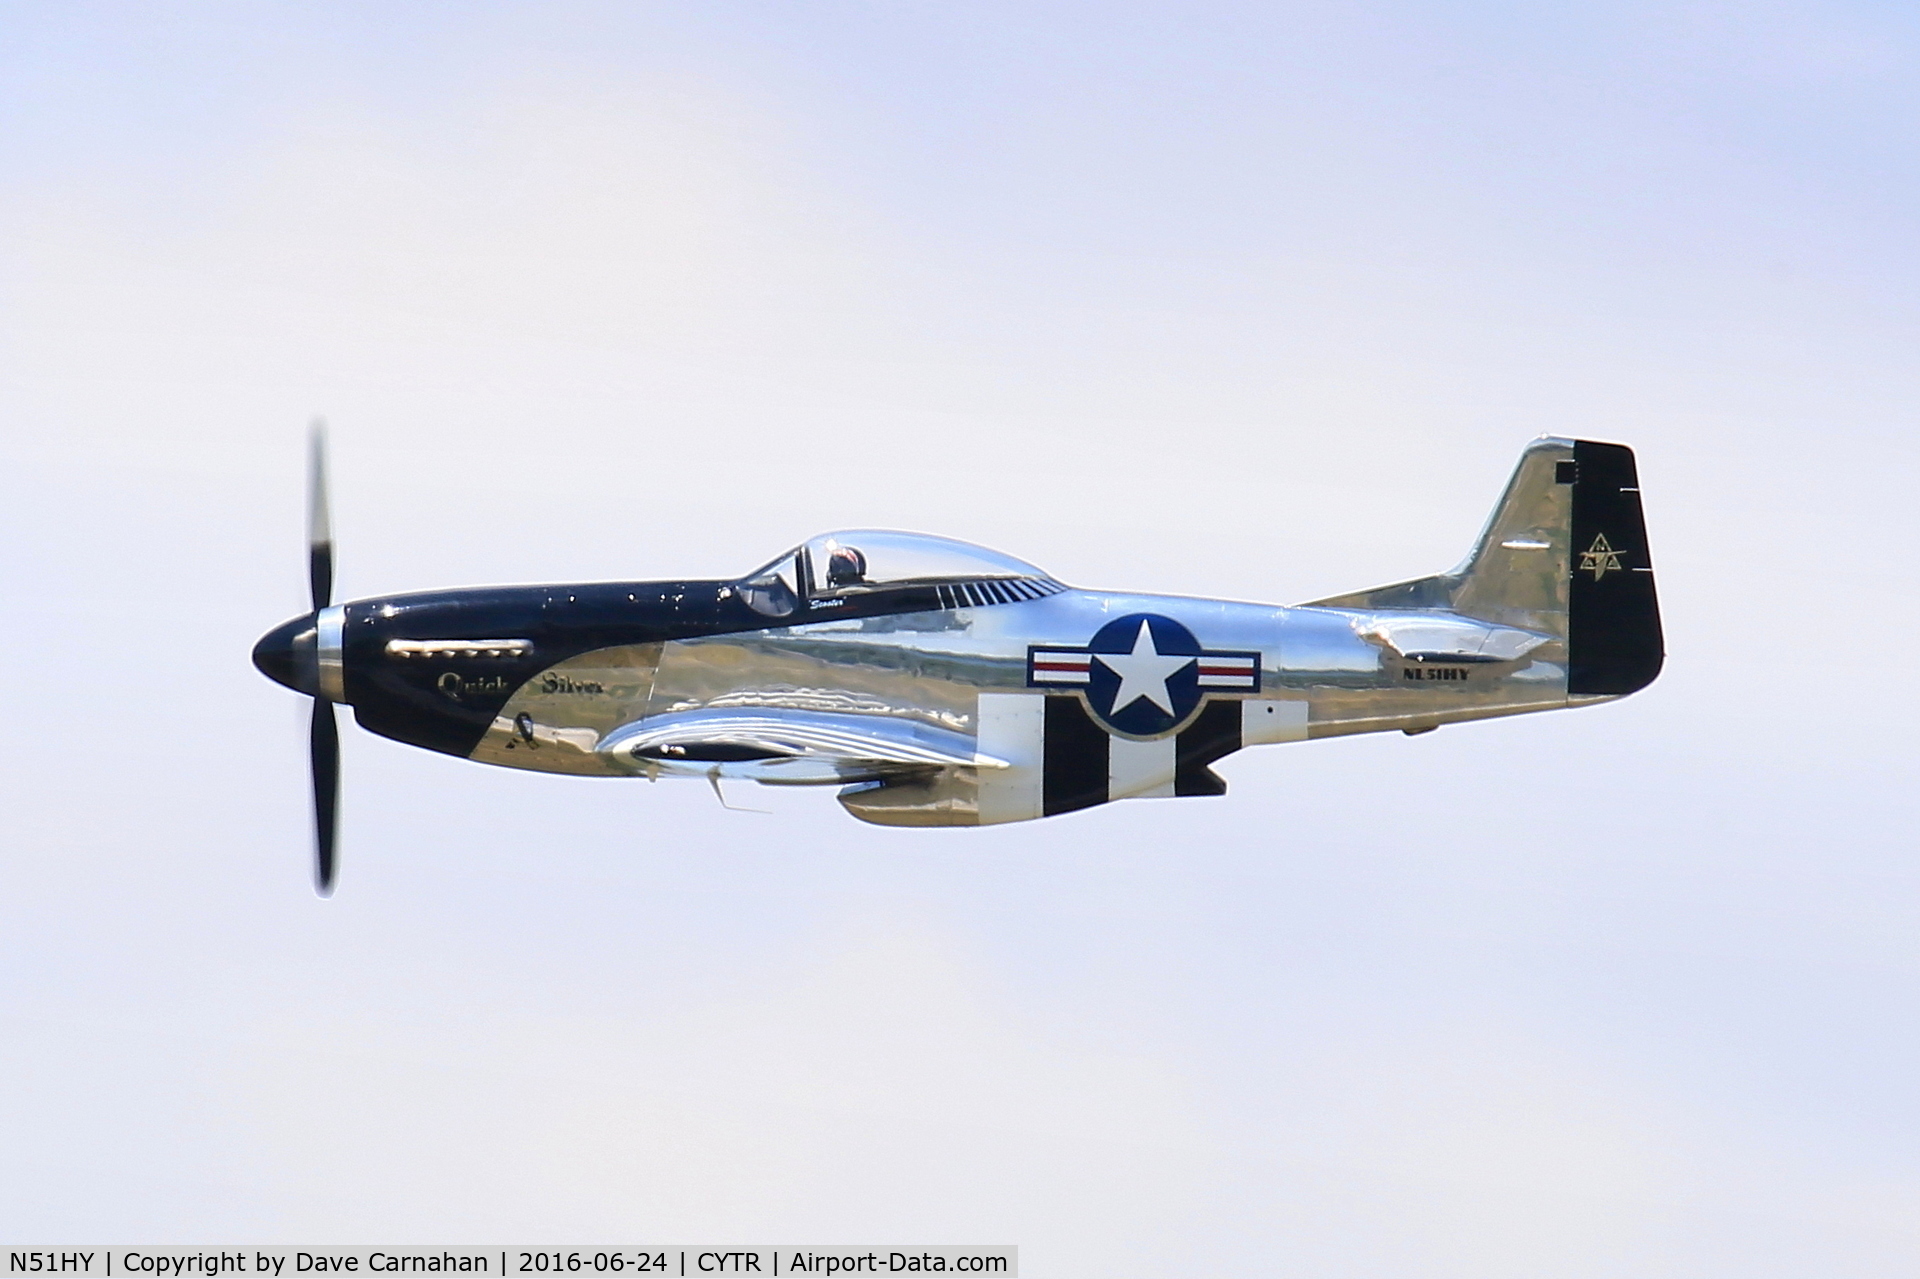 N51HY, 1944 North American P-51D Mustang C/N 45-11439, Quick Silver tearing up the skies over Trenton, Ontario, Canada